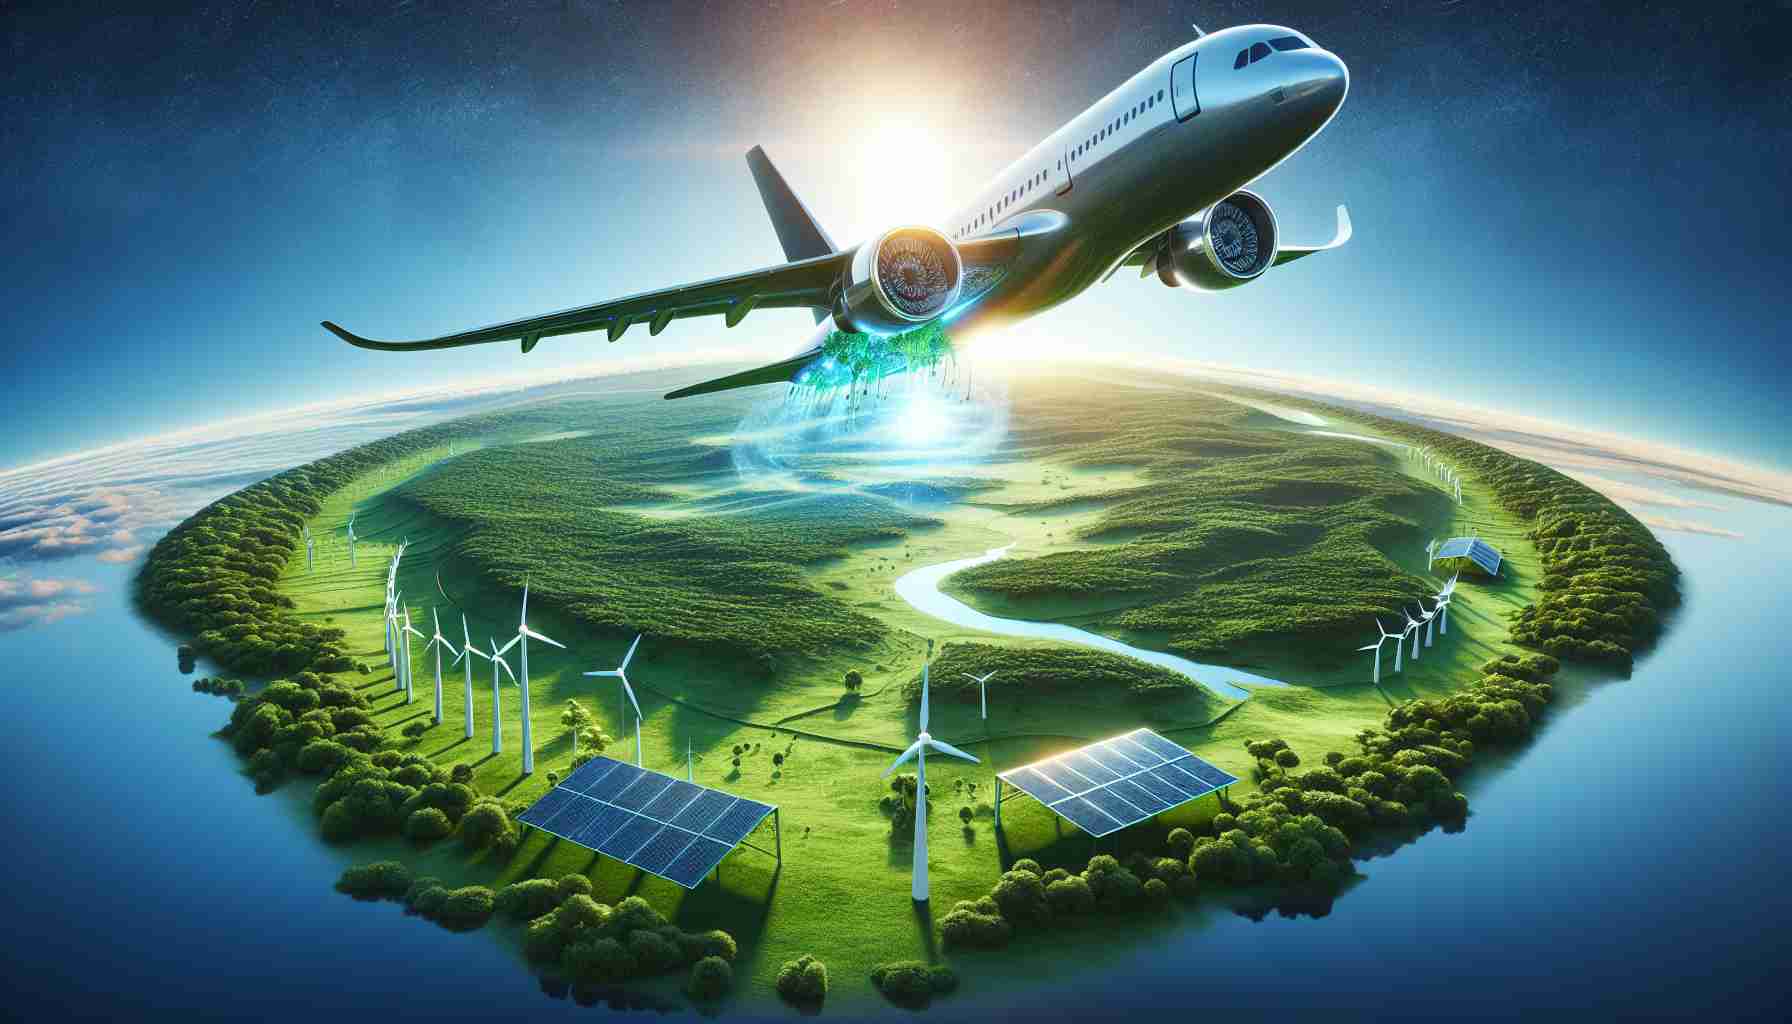 A highly detailed and realistic image representing the concept of revolutionizing aviation sustainability for a greener future. The scene could include an imaginative design of an eco-friendly, futuristic airplane soaring in the clear blue sky. Beneath the plane, there is a lush green landscape symbolizing a cleaner and healthier earth. Solar panels and wind turbines can be seen at appropriate locations on the ground, implying the use of renewable energy sources in aviation. Also, prominent on the plane design could be elements indicating the use of sustainable materials and energy-efficient technology.